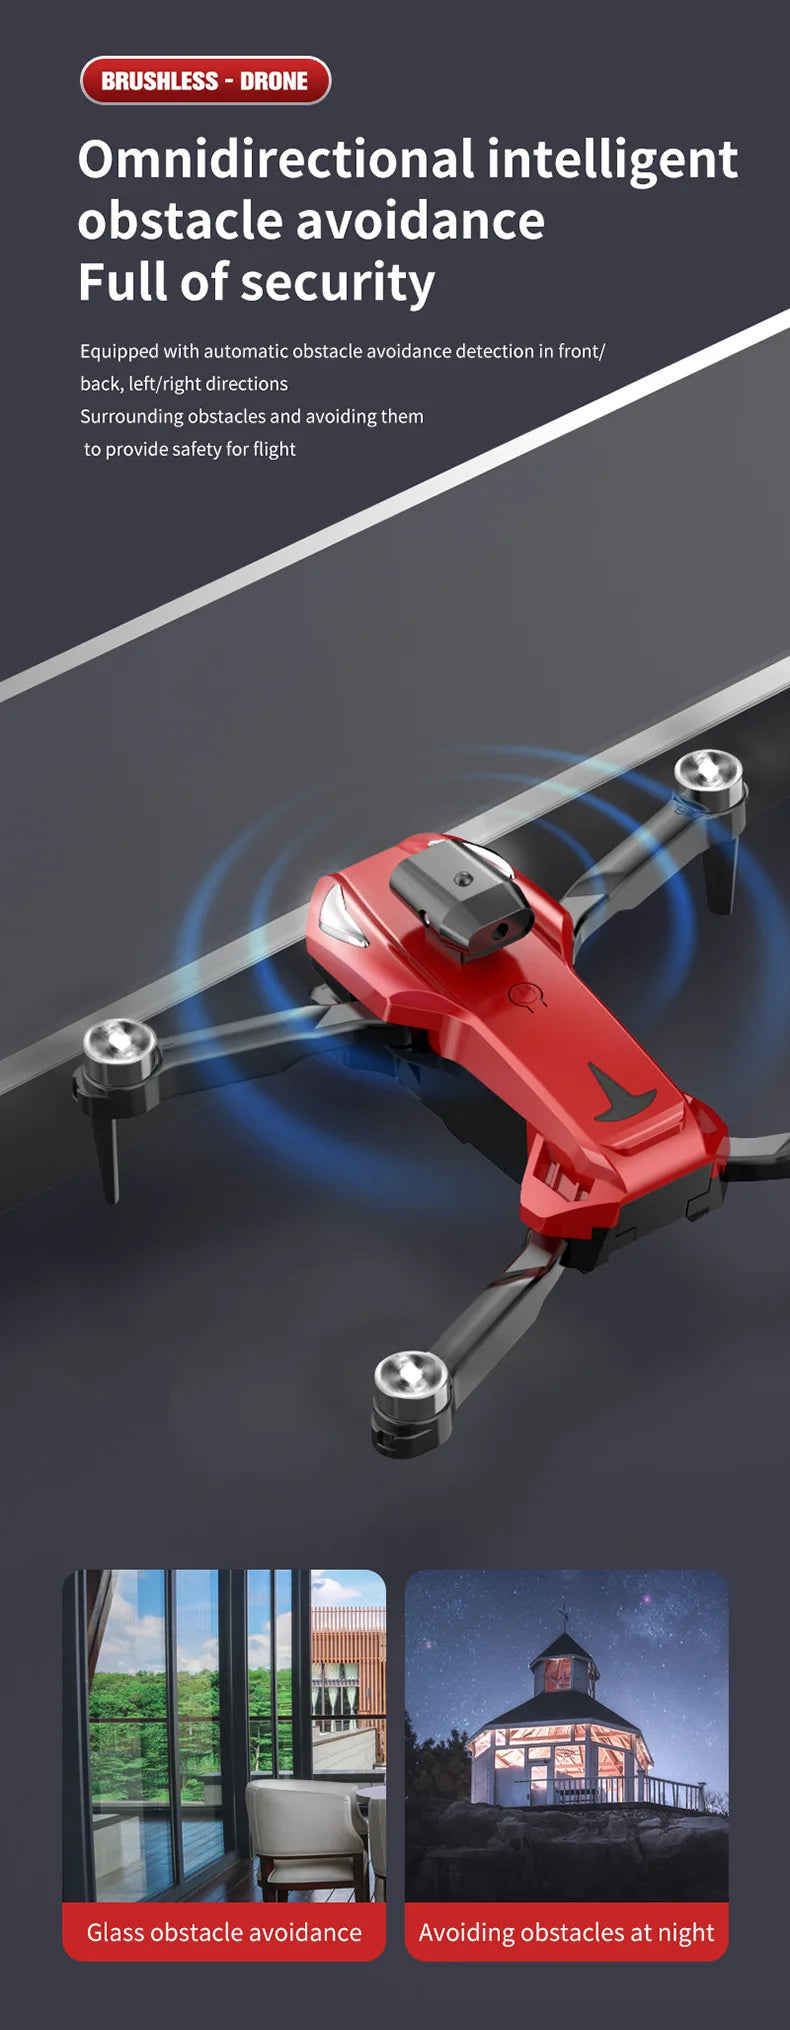 S178 L818 Drone, drone omnidirectional obstacle avoidance avoiding obstacles at night .